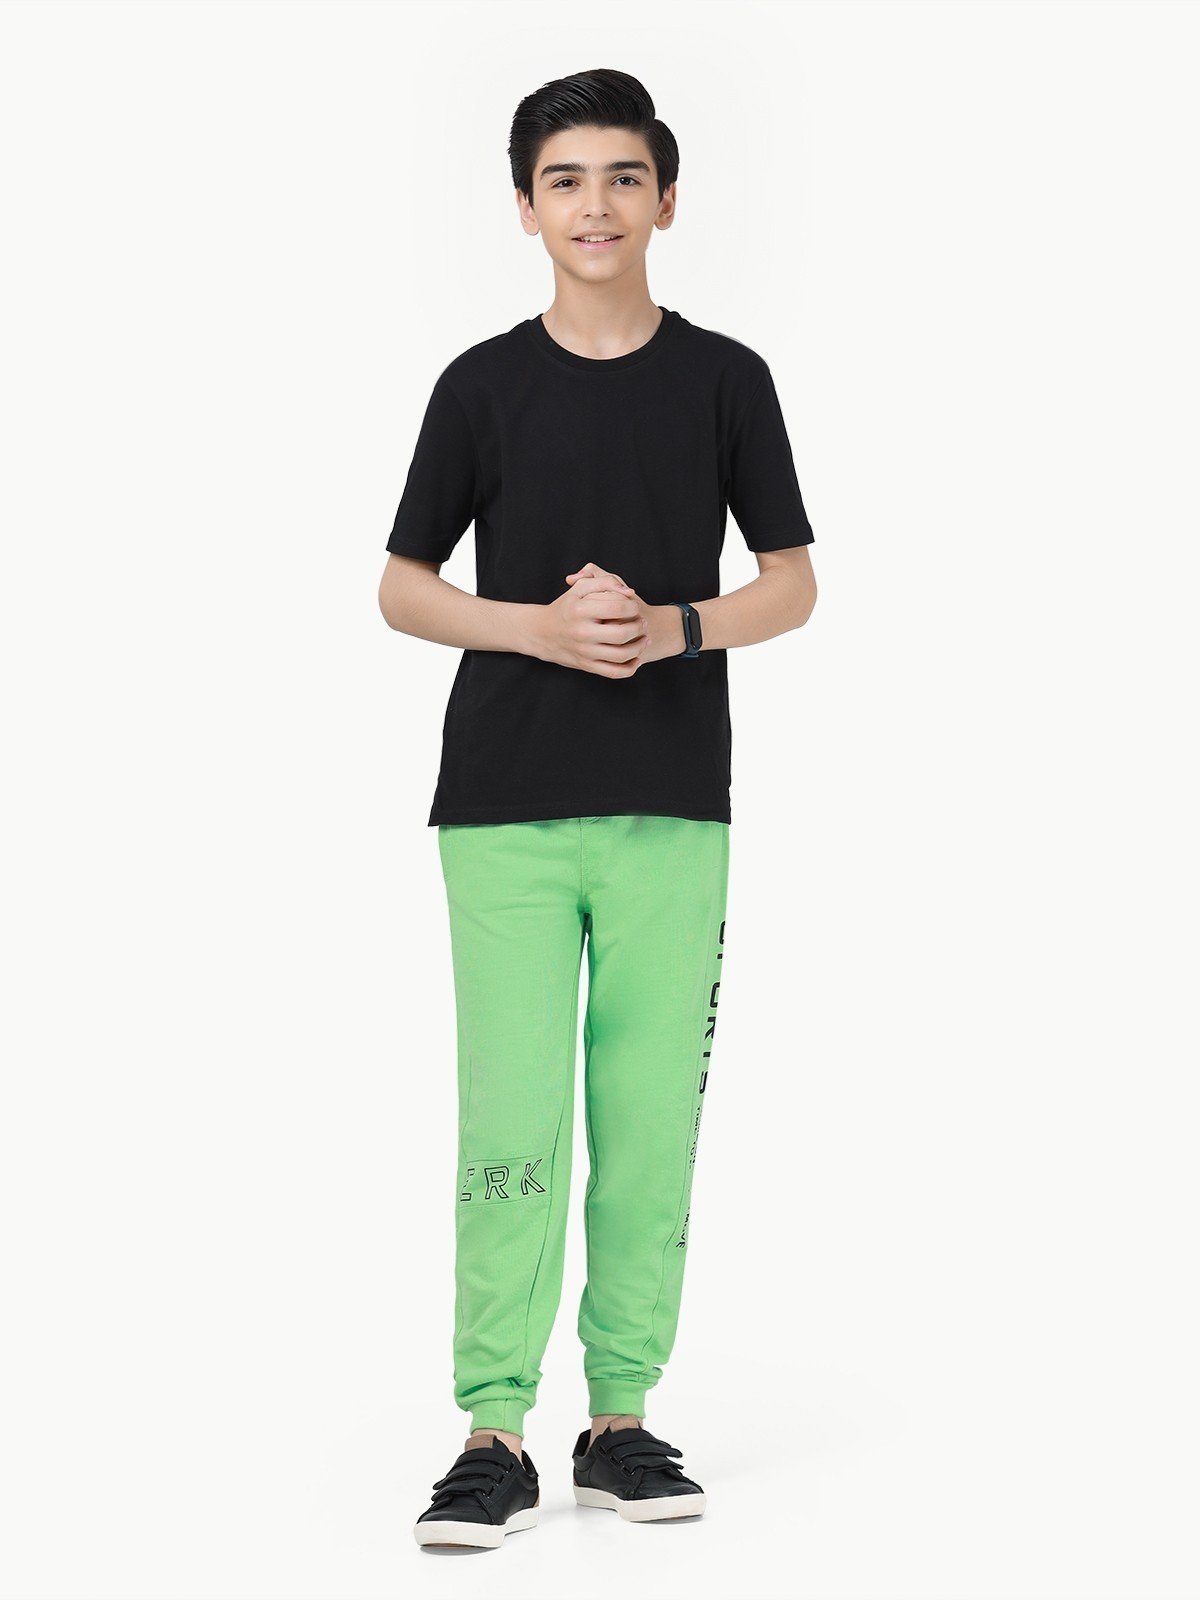 Buy Cotton Spandex Slim Fit Cargo Casual Trouser Jeans Pant for Boys| Men  (Olive) at Amazon.in